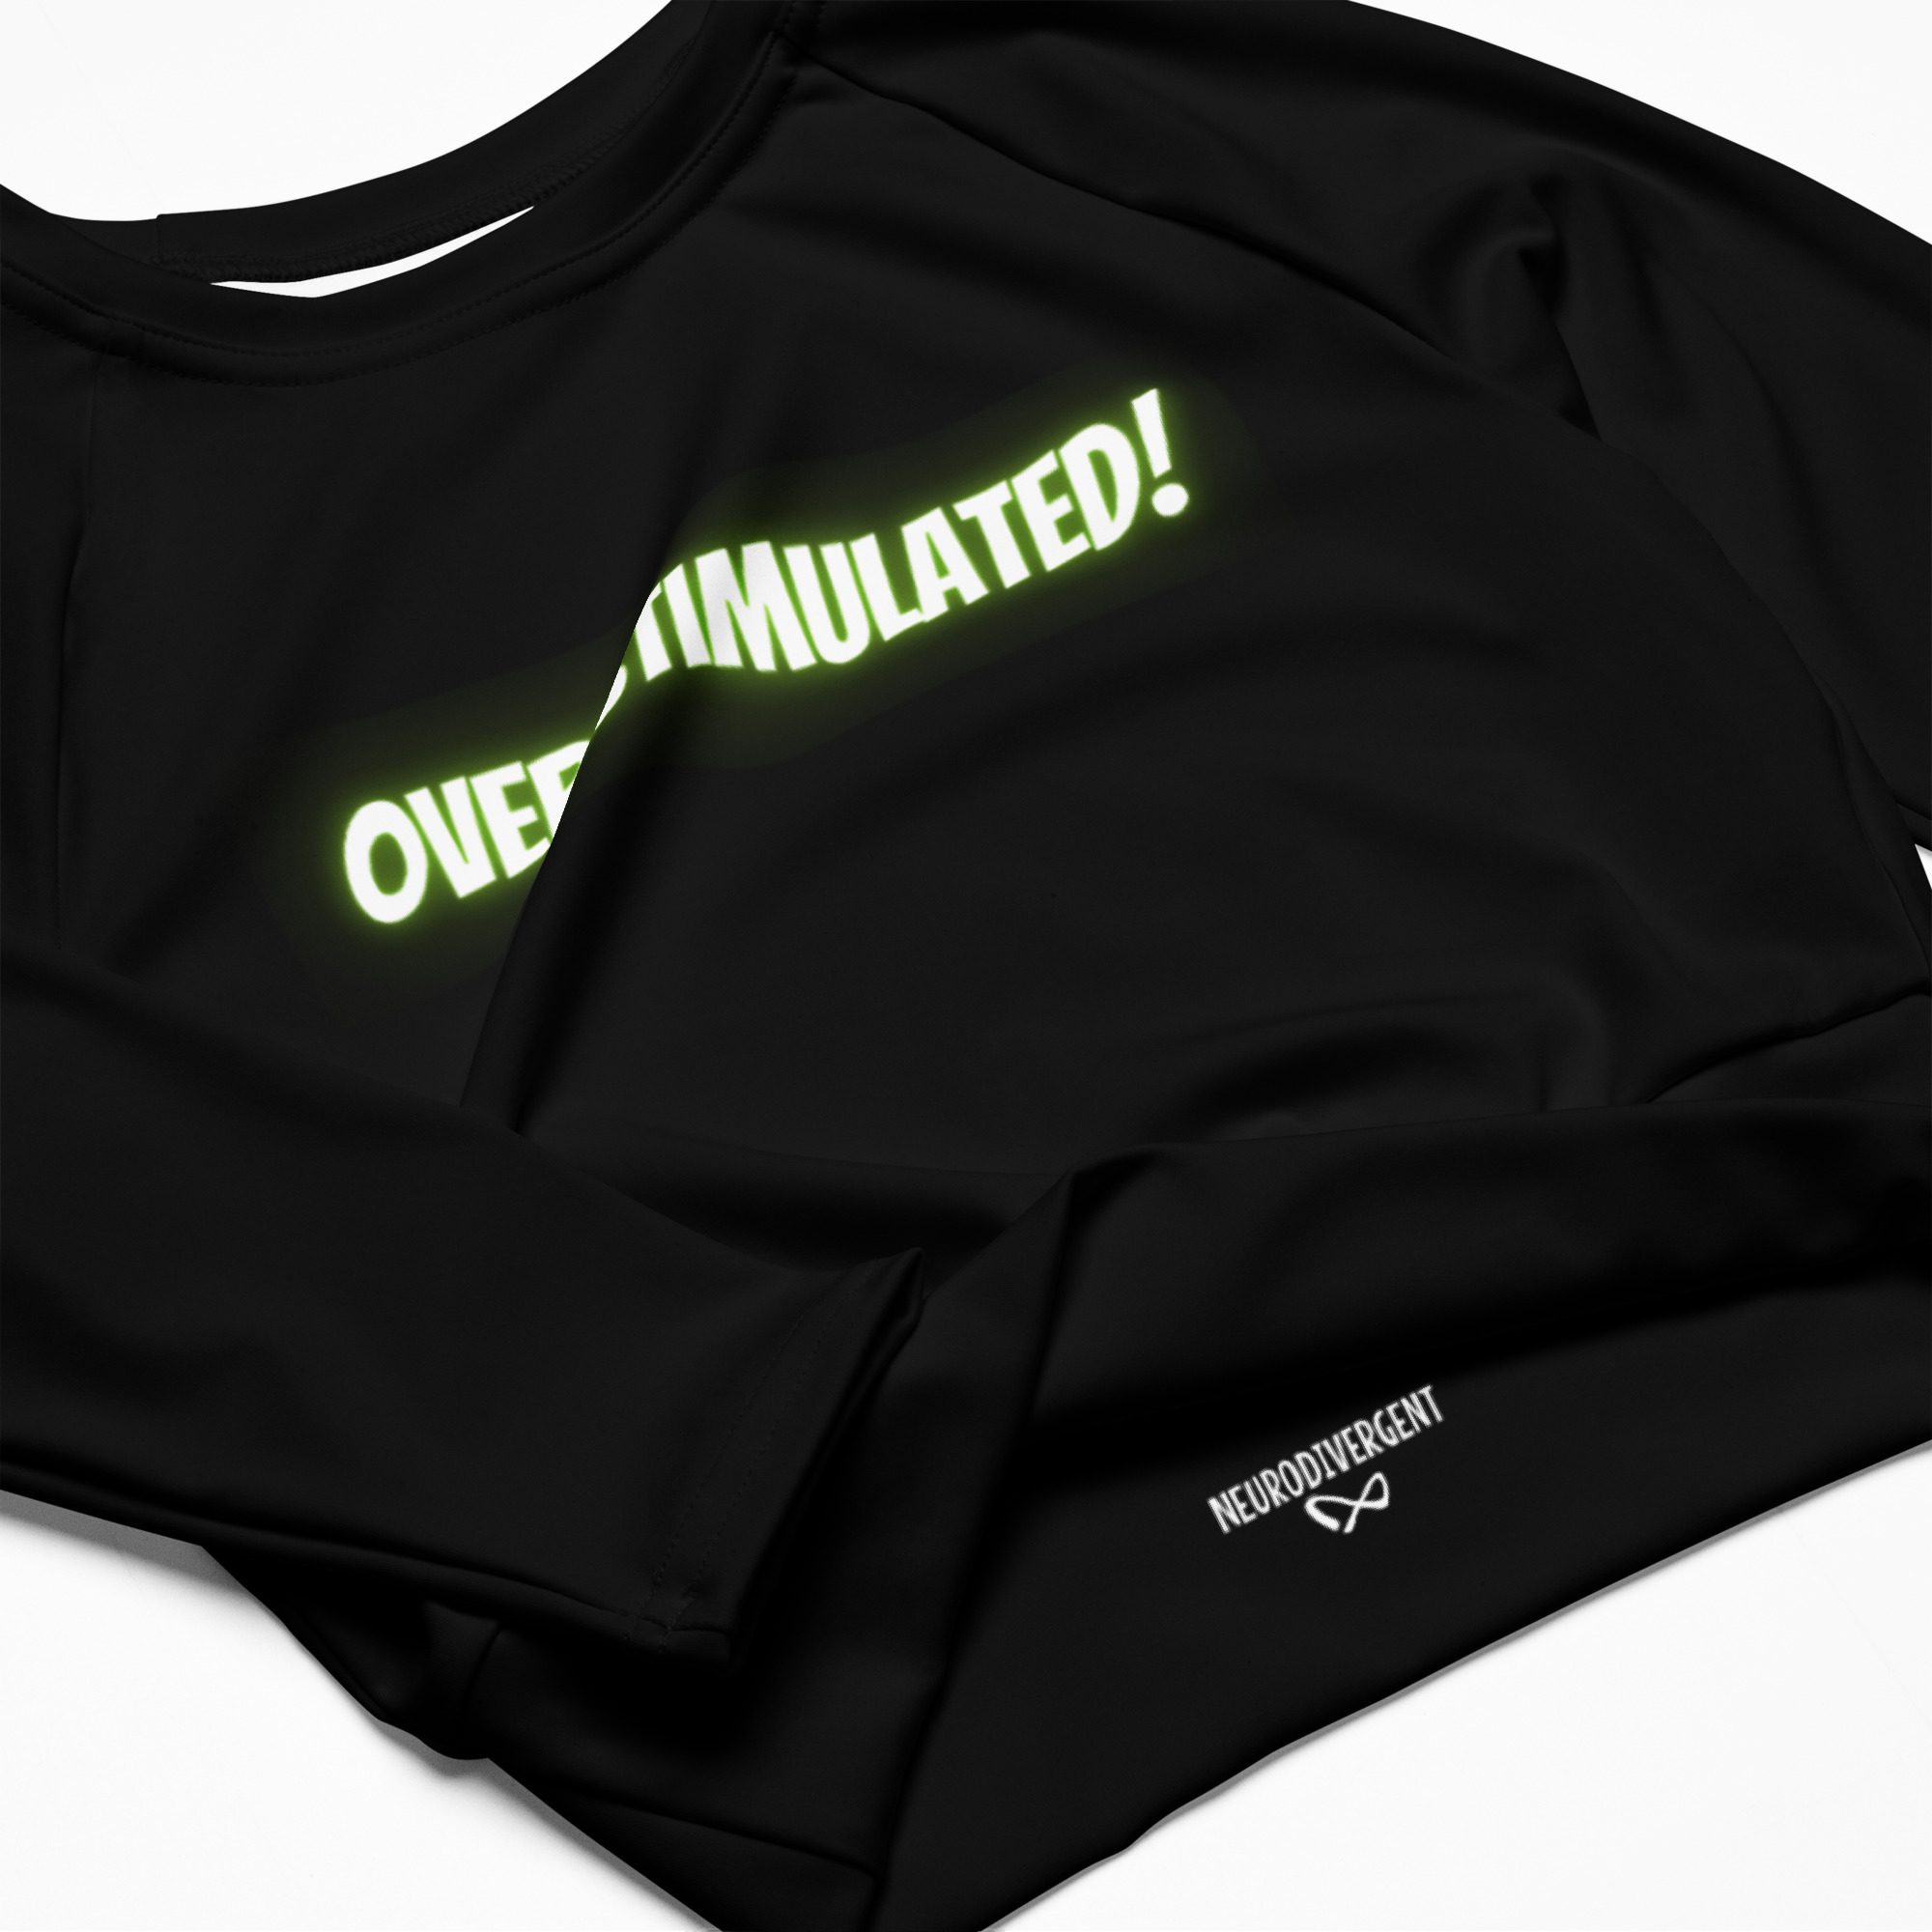 OVERSTIMULATED! Recycled Long-sleeve Crop Top